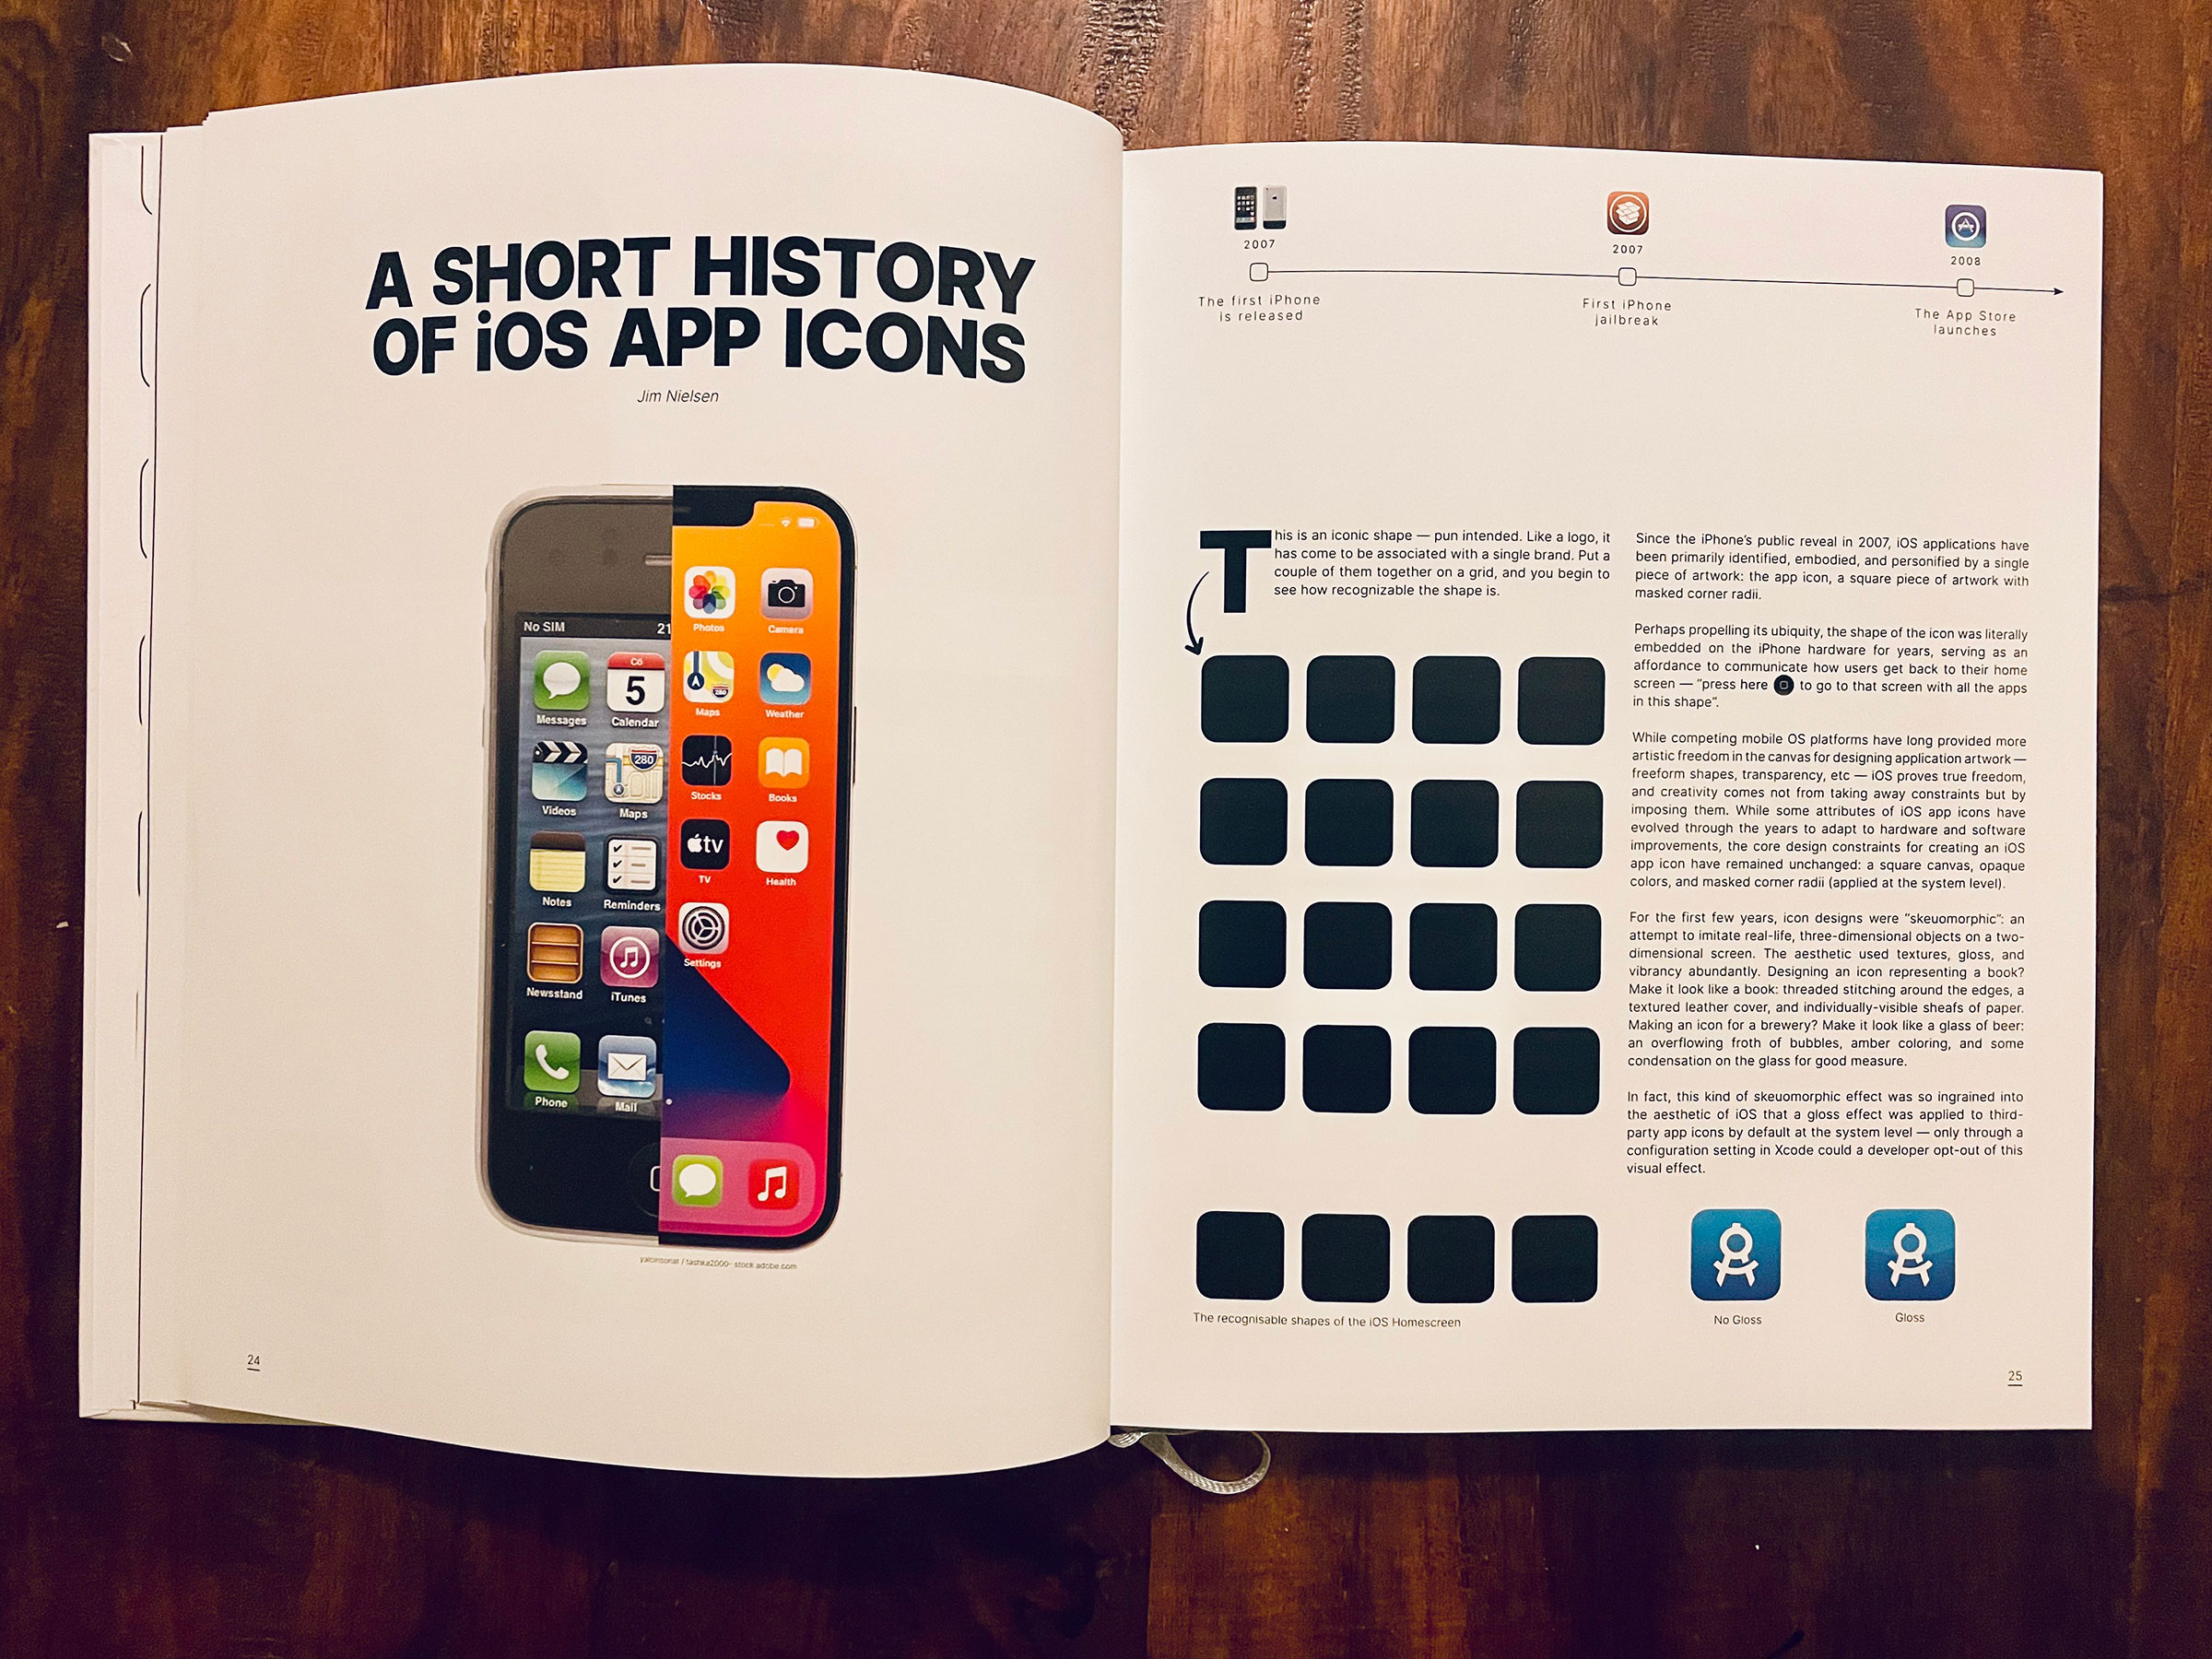 Photograph of spread 1 of 2 of the chapter “A Short History of iOS App Icons” from “The iOS App Icon Book”.